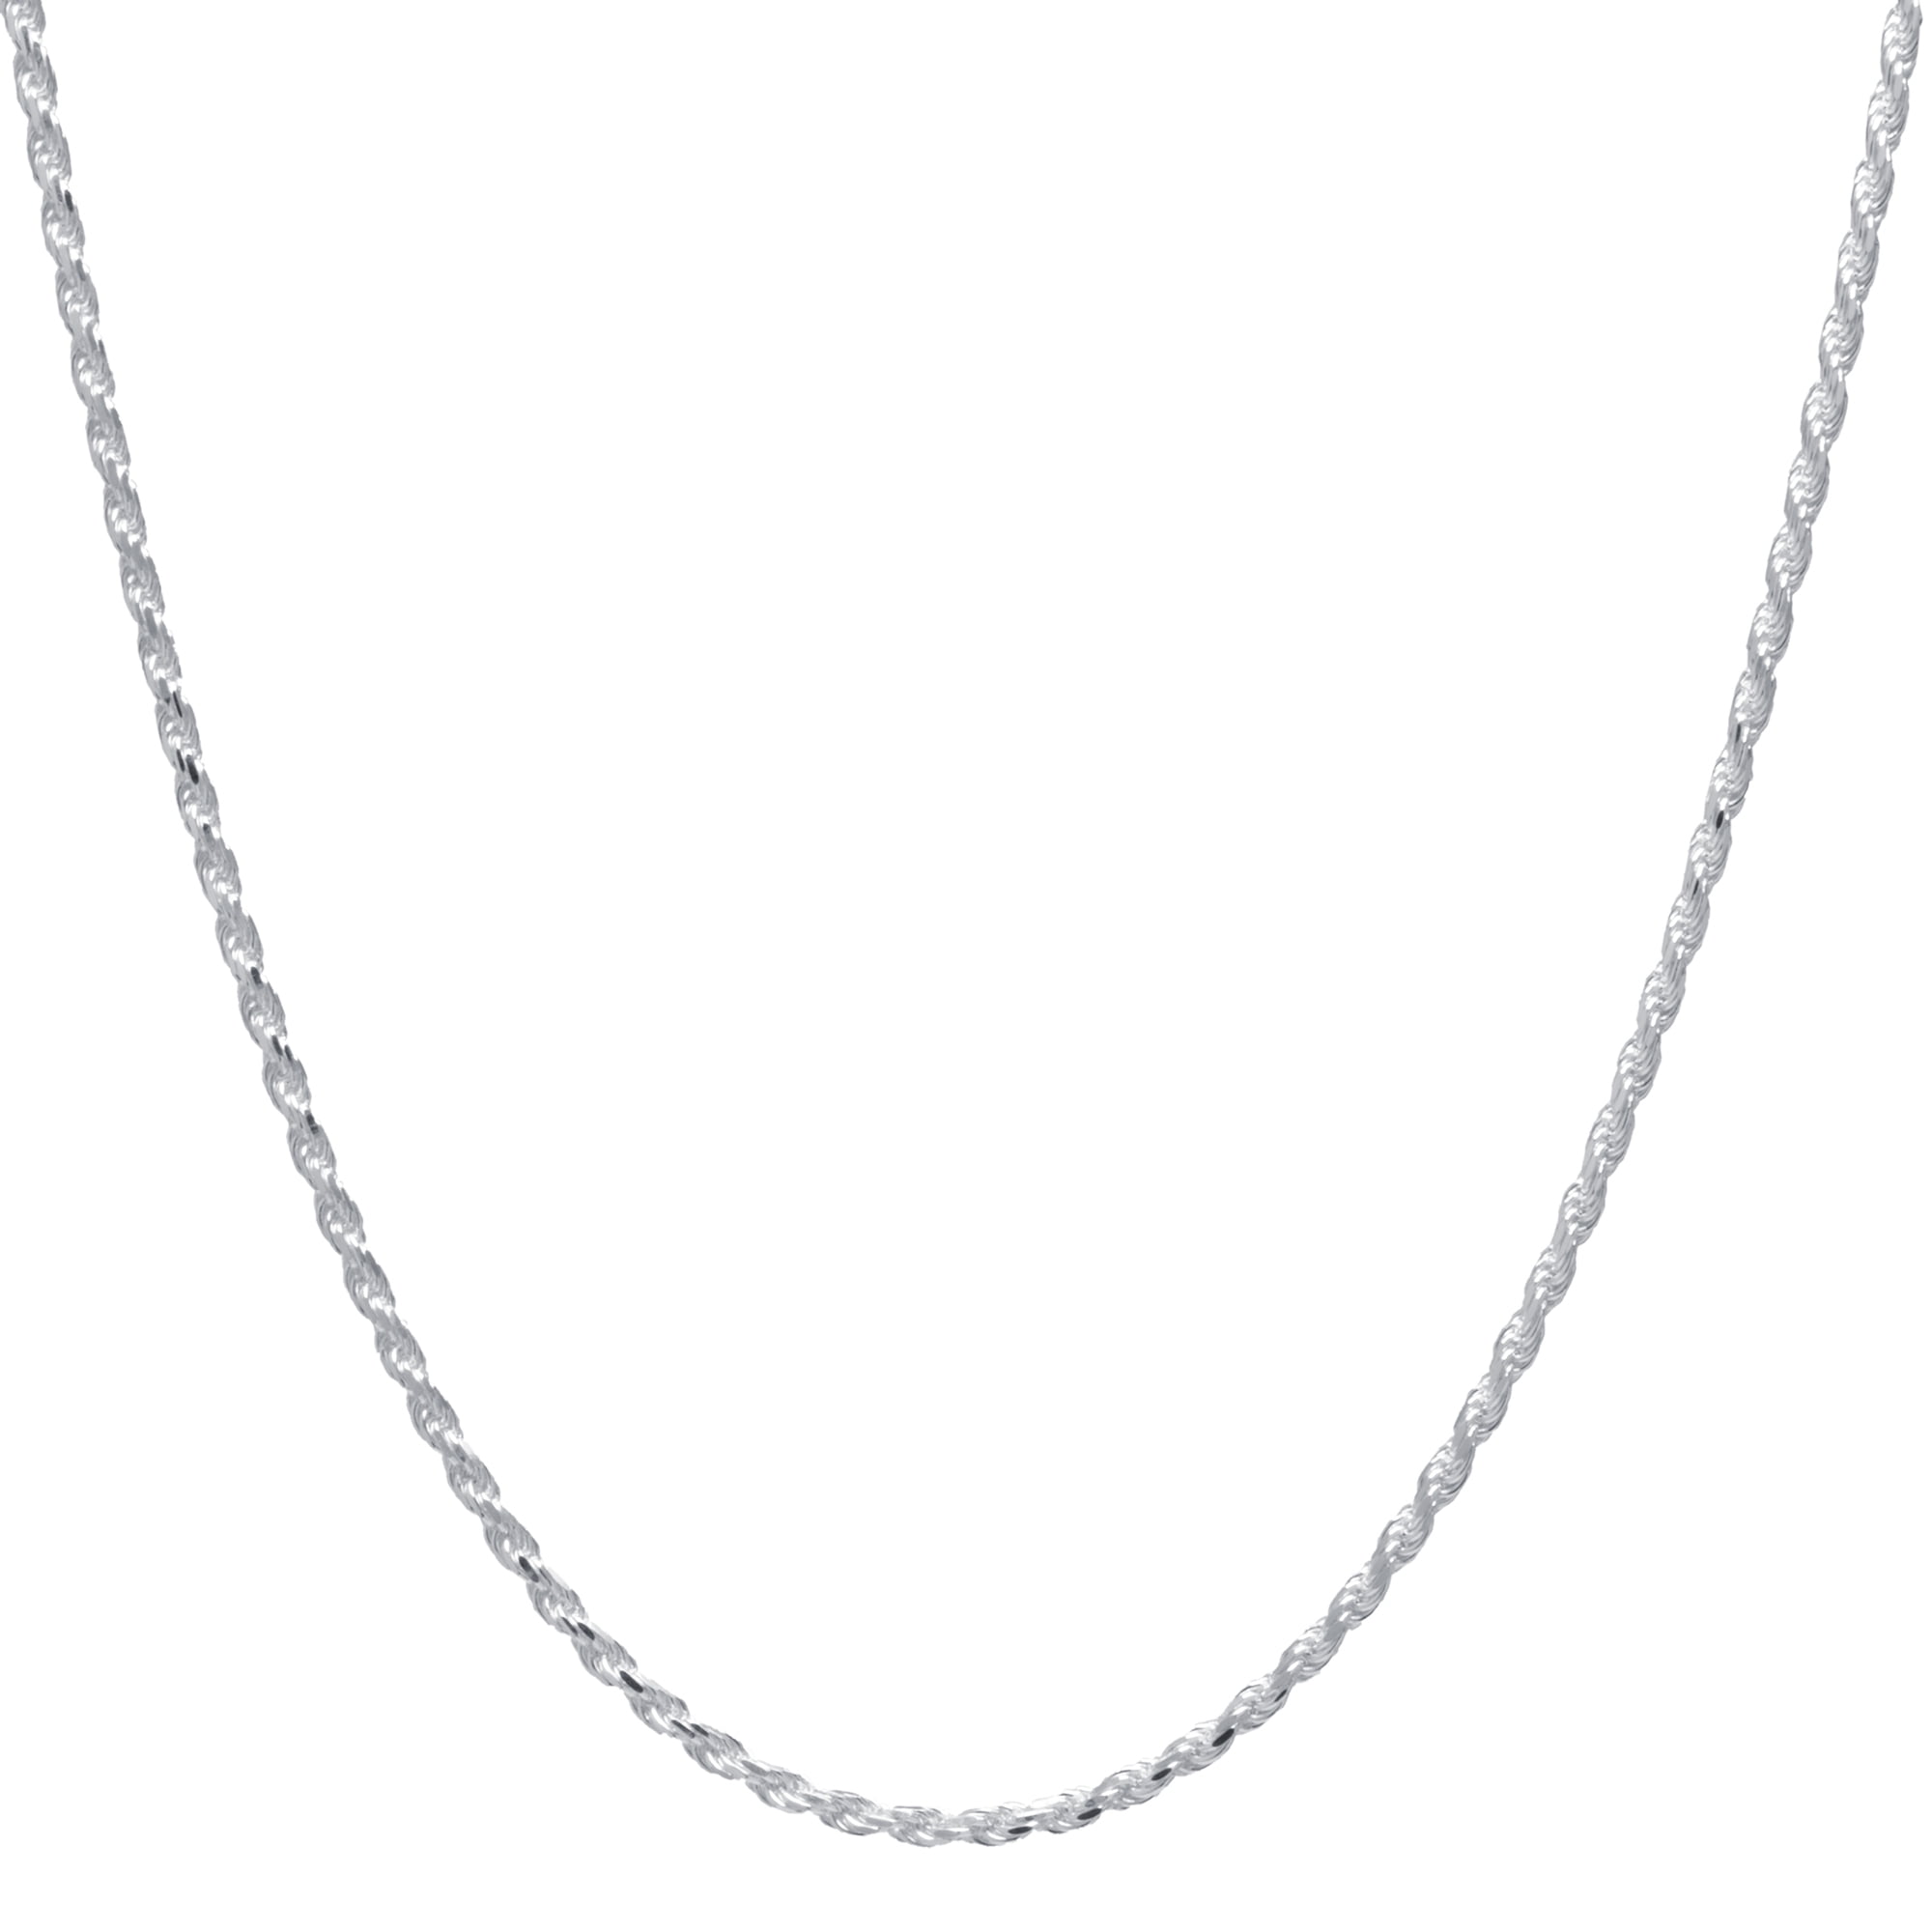 ROPE DESIGN ROPE080/925 STERLING SILVER CHAIN 24 INCH LONG /LOBSTER LOCK